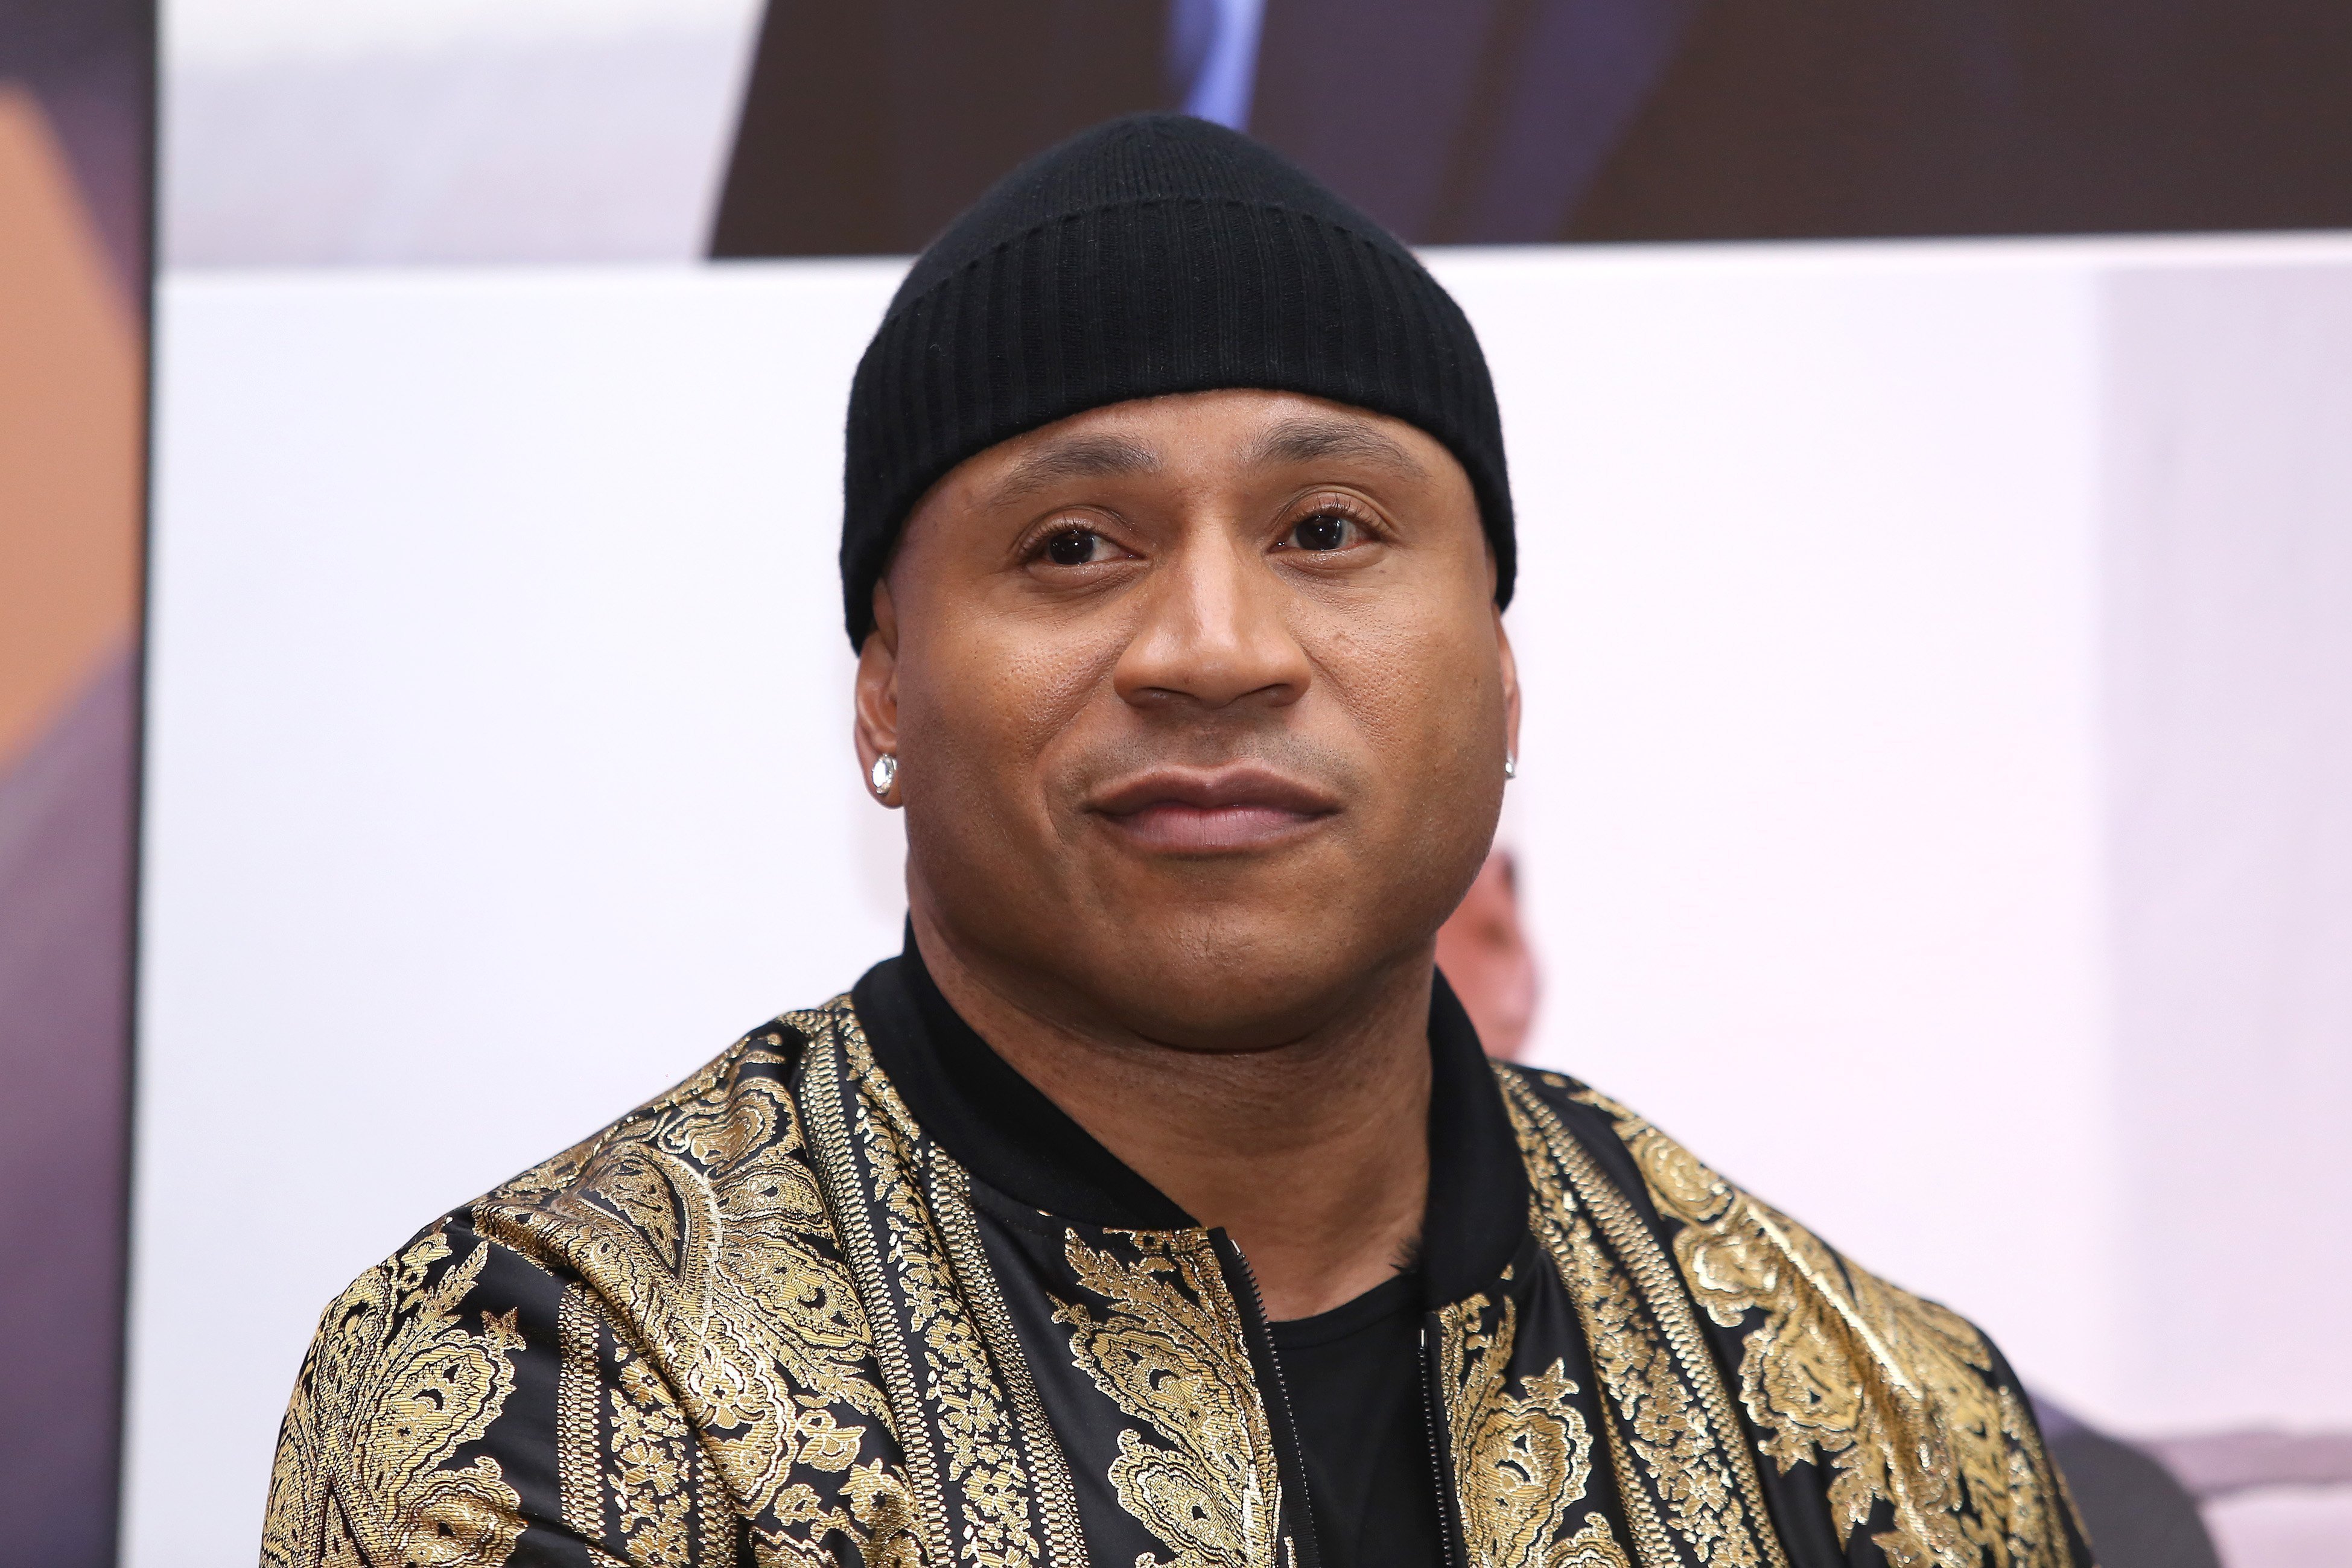 LL Cool J poses for photos during a press conference at Hotel St. Regis on June 5, 2019 in Mexico City, Mexico | Photo: GettyImages